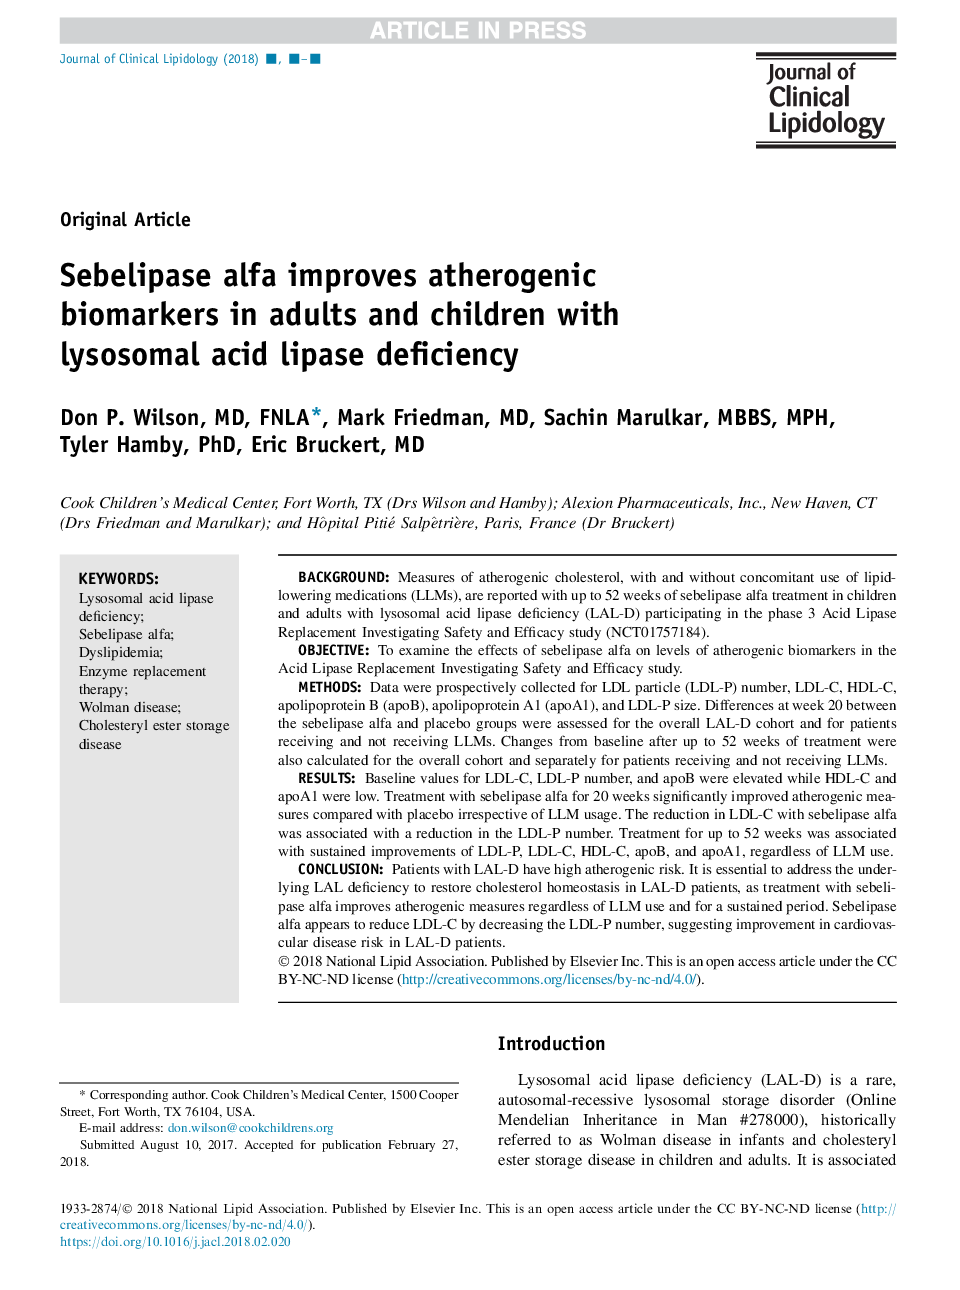 Sebelipase alfa improves atherogenic biomarkers in adults and children with lysosomal acid lipase deficiency